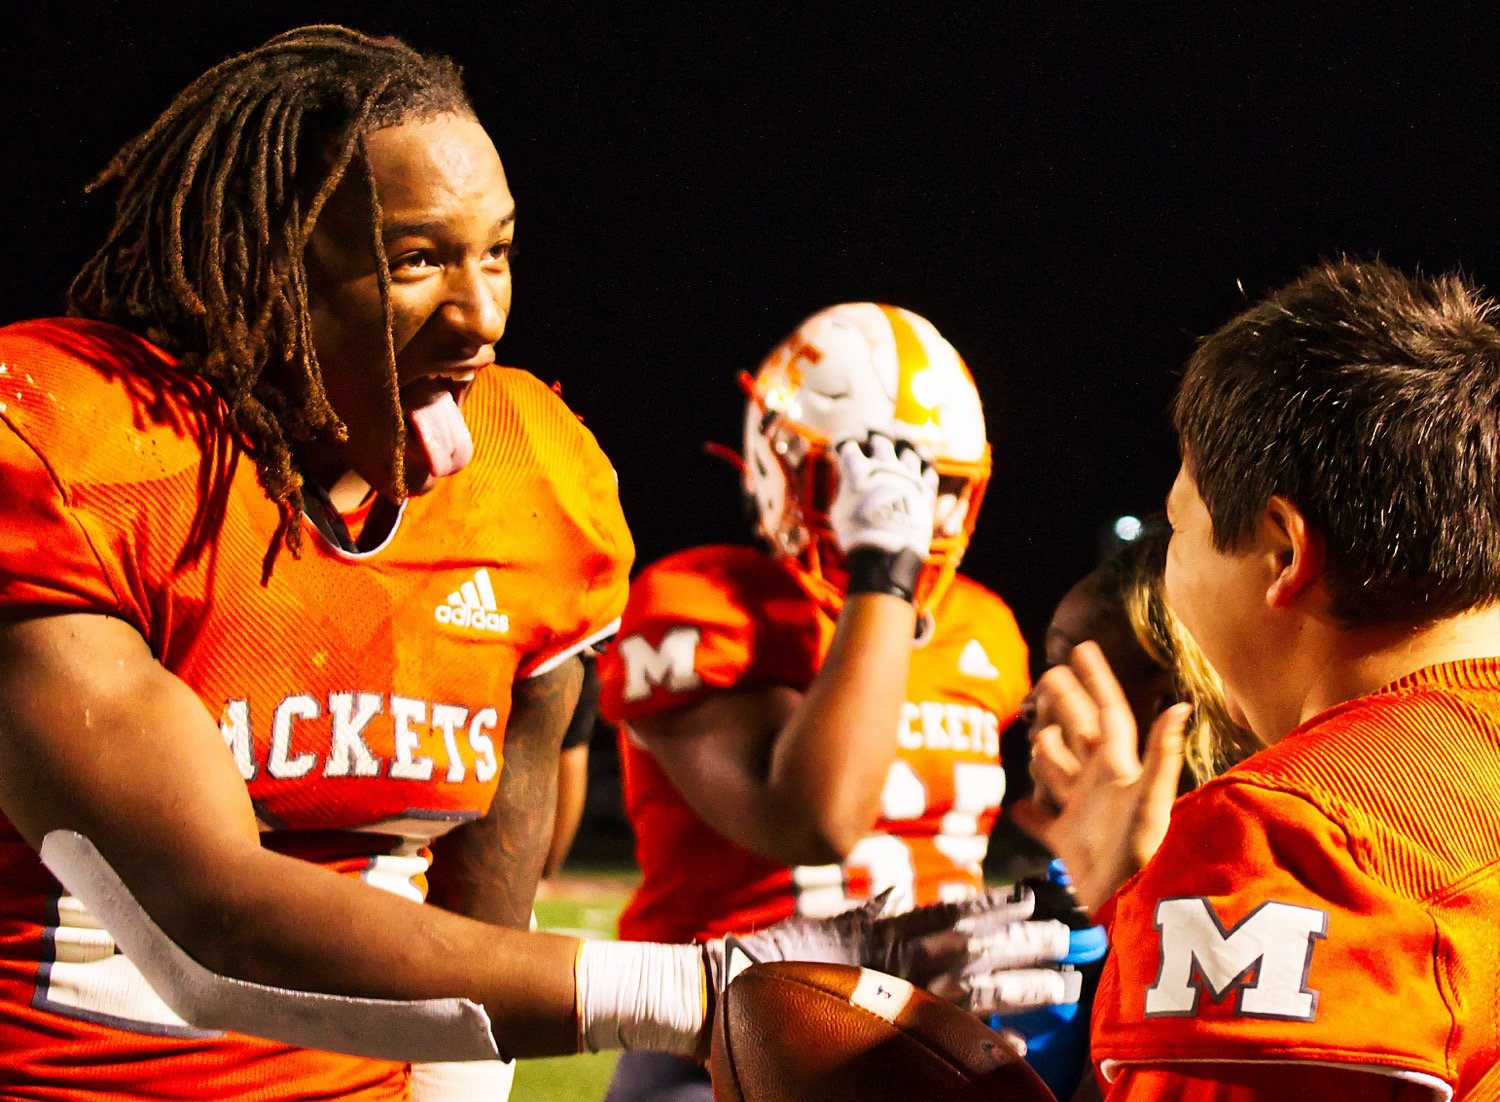 Trevion Sneed, having rung up 301 rushing yards on the night, shares his joy with a ball boy. With a secure lead over Dallas Madison in the fourth quarter, celebrations began early on the Mineola sidelines Nov. 20 in Princeton.